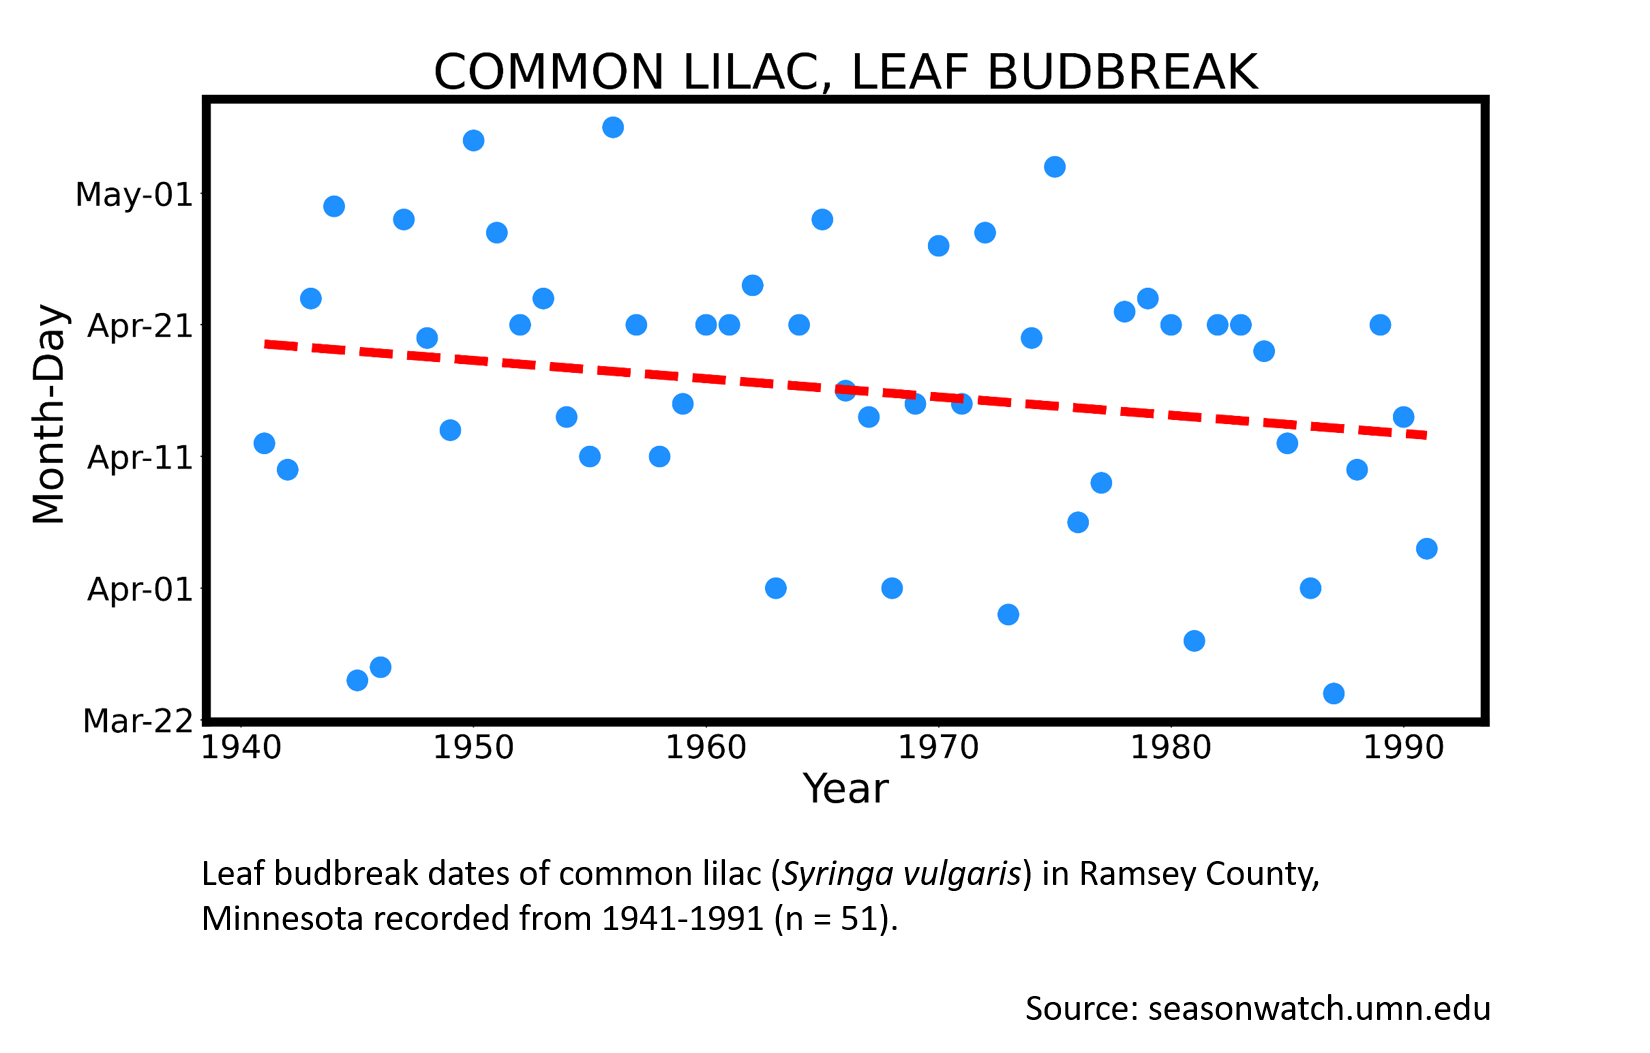 Scatterplot showing common lilac phenology observations in Ramsey County, Minnesota